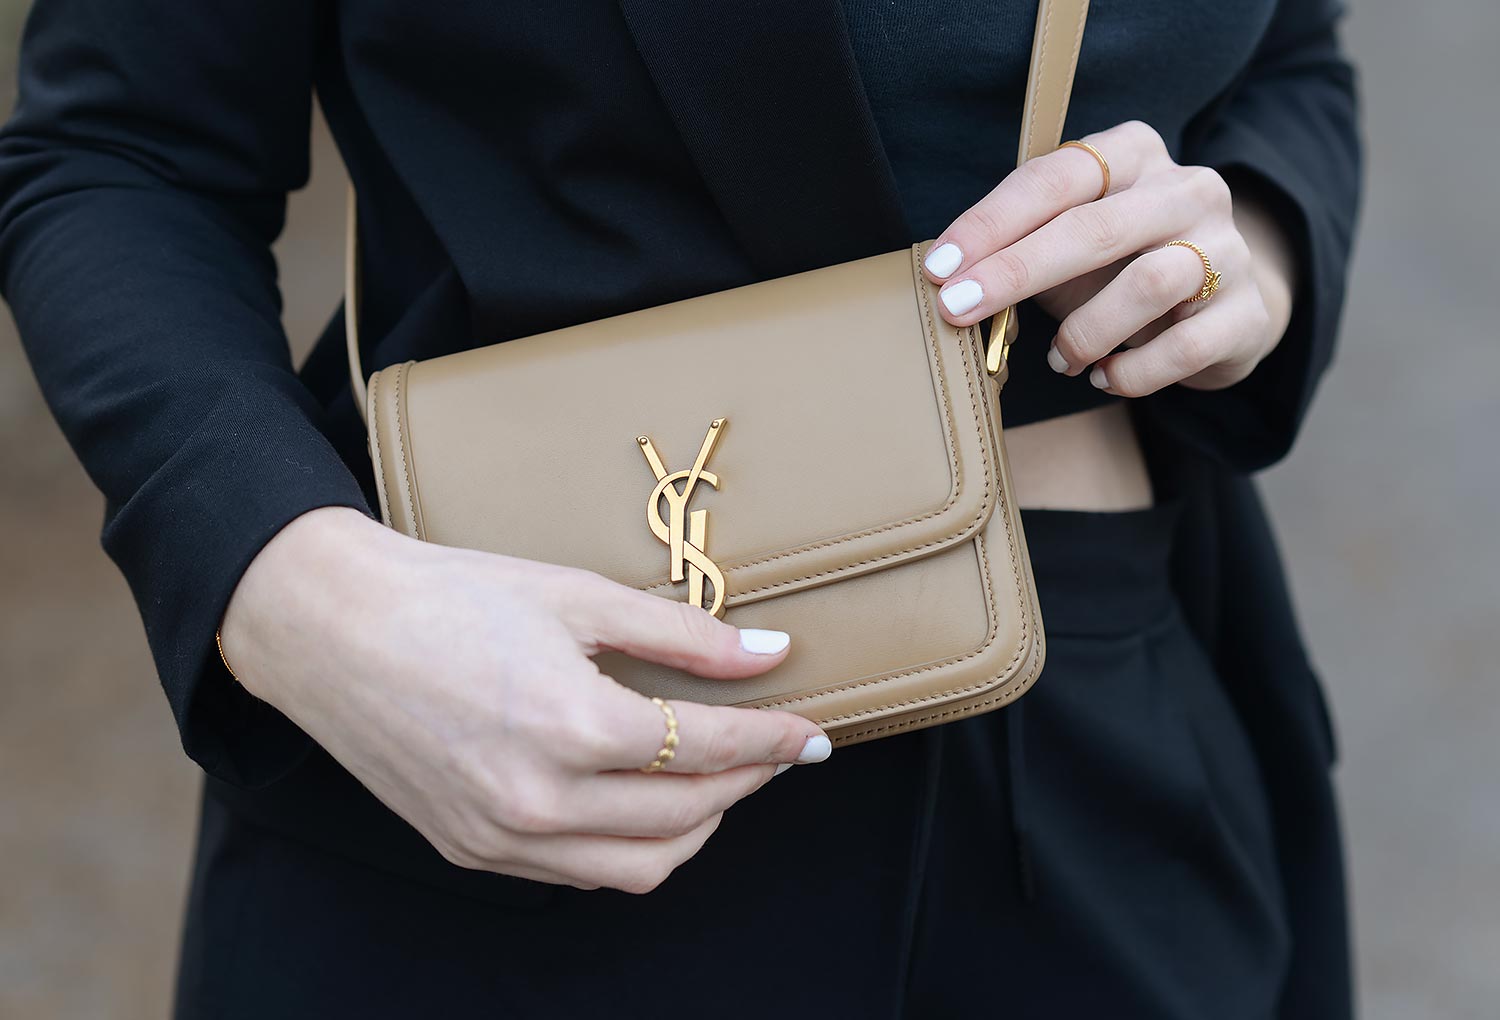 YSL SOLFERINO BAG REVIEW, TRY ON, WHAT FITS